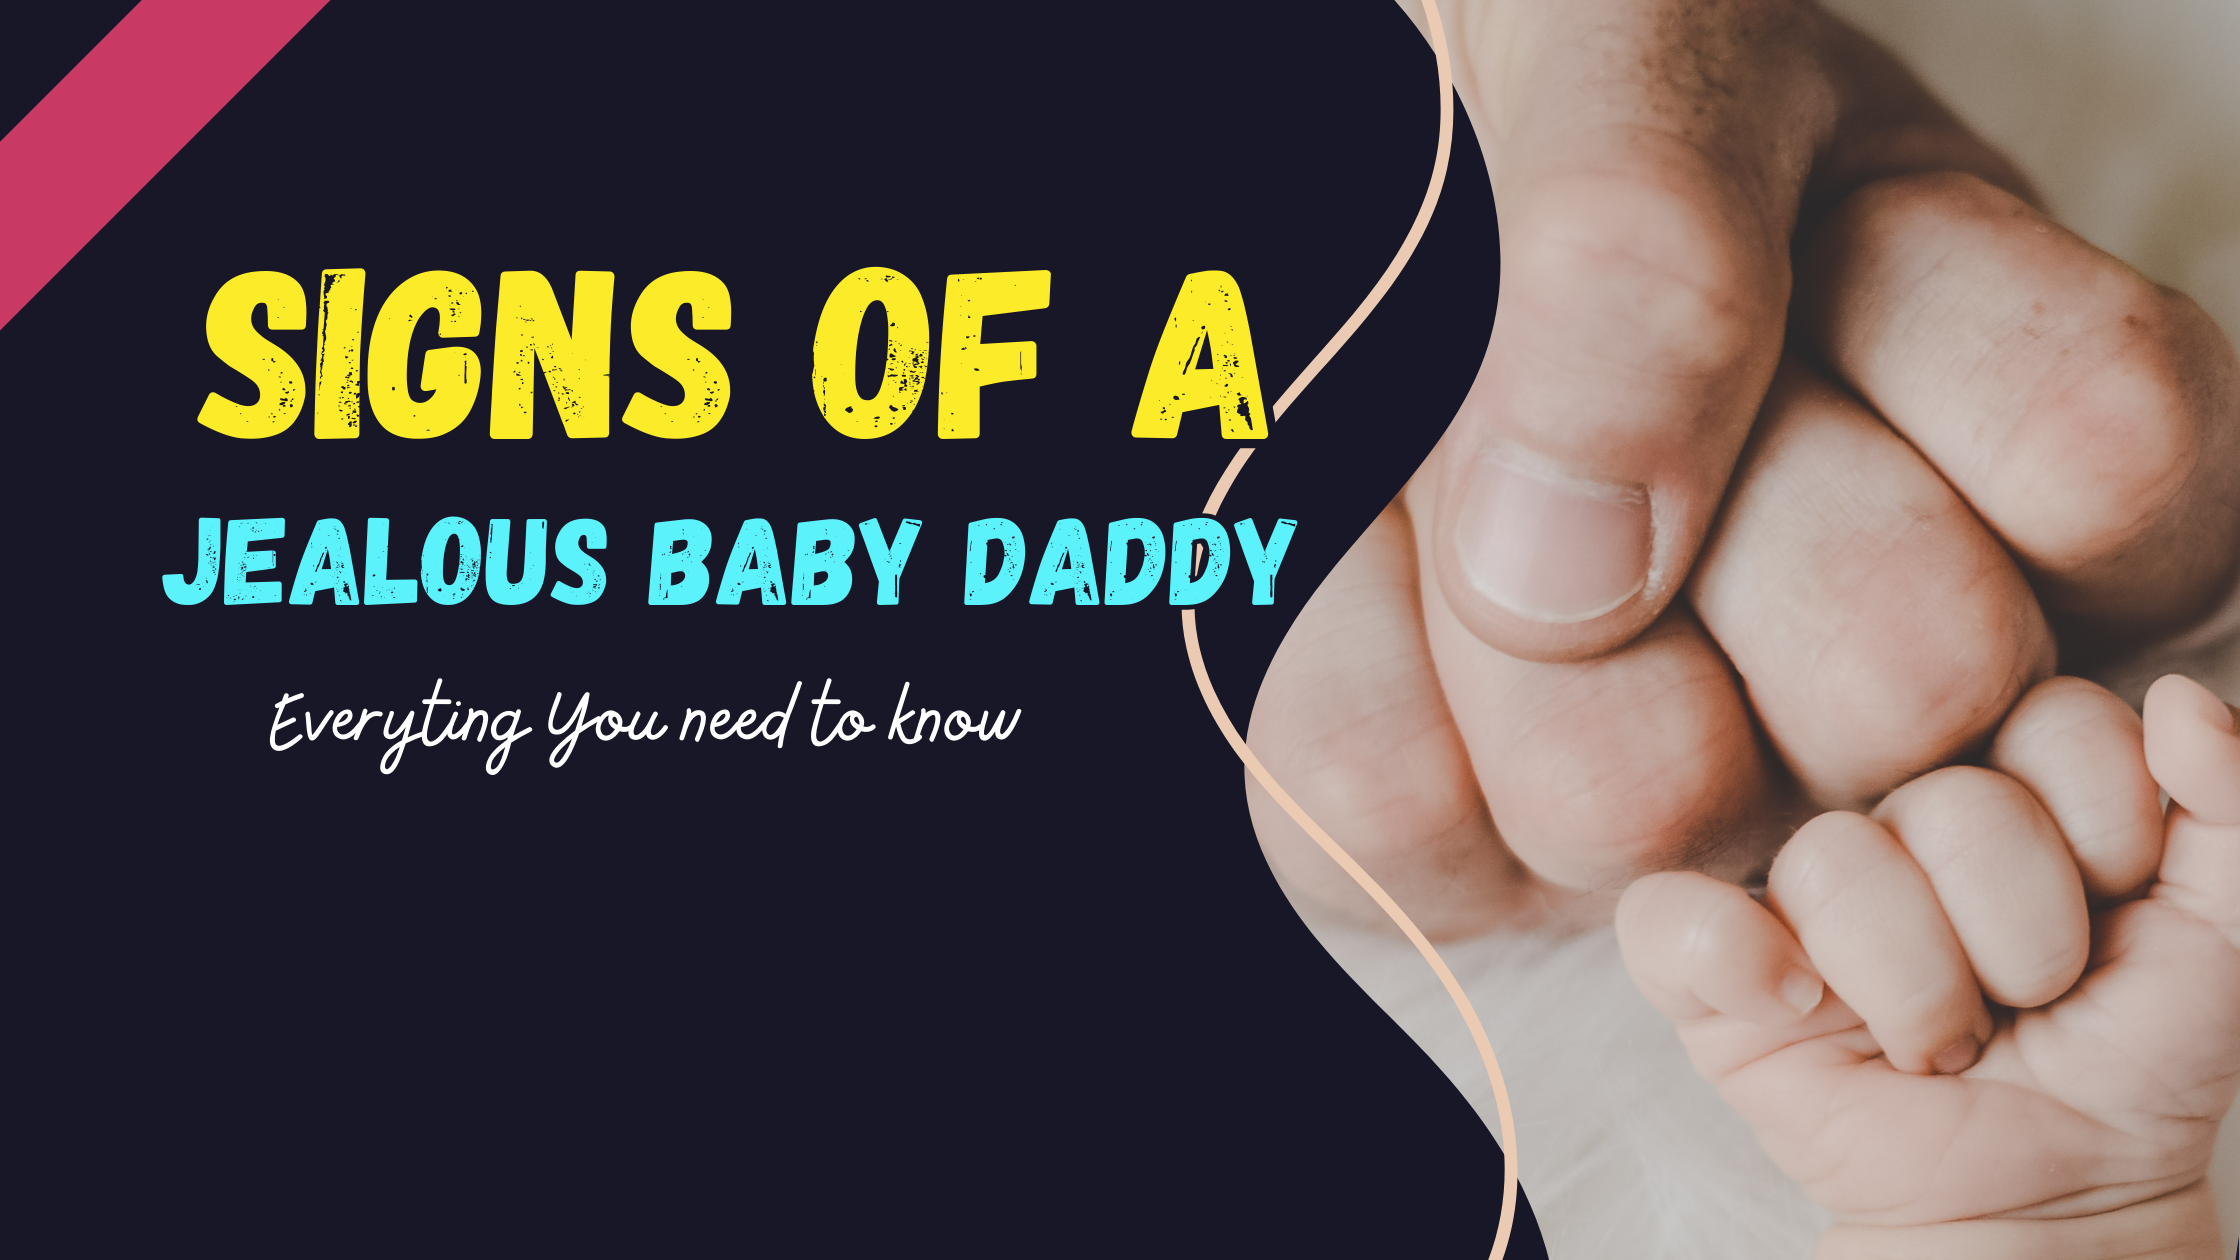 Signs of a Jealous Baby Daddy